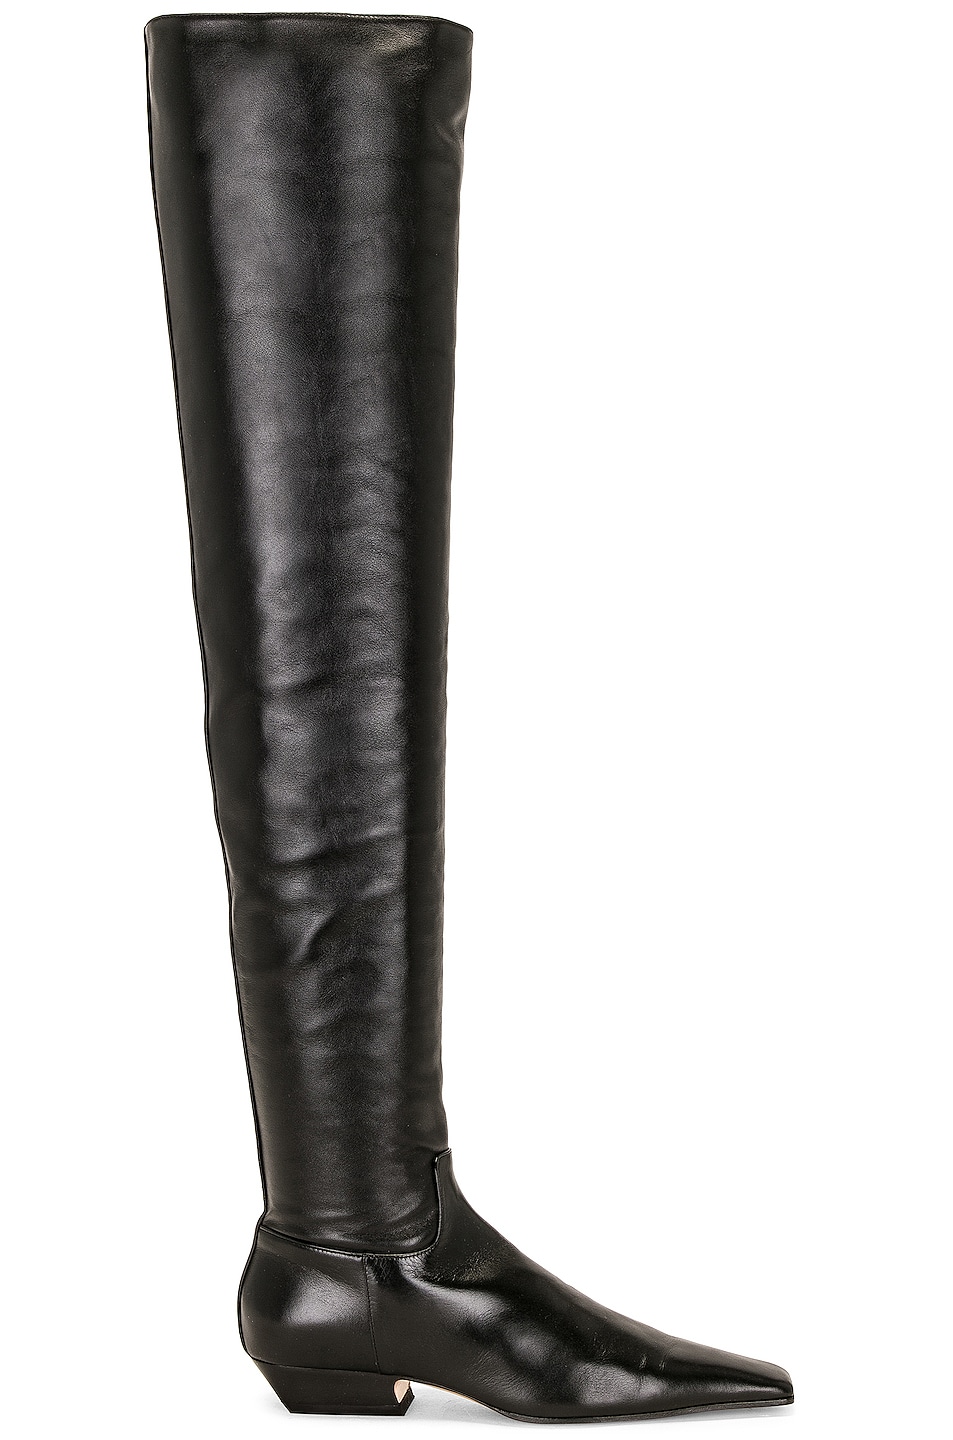 Marfa Classic Flat Over The Knee Boot in Black